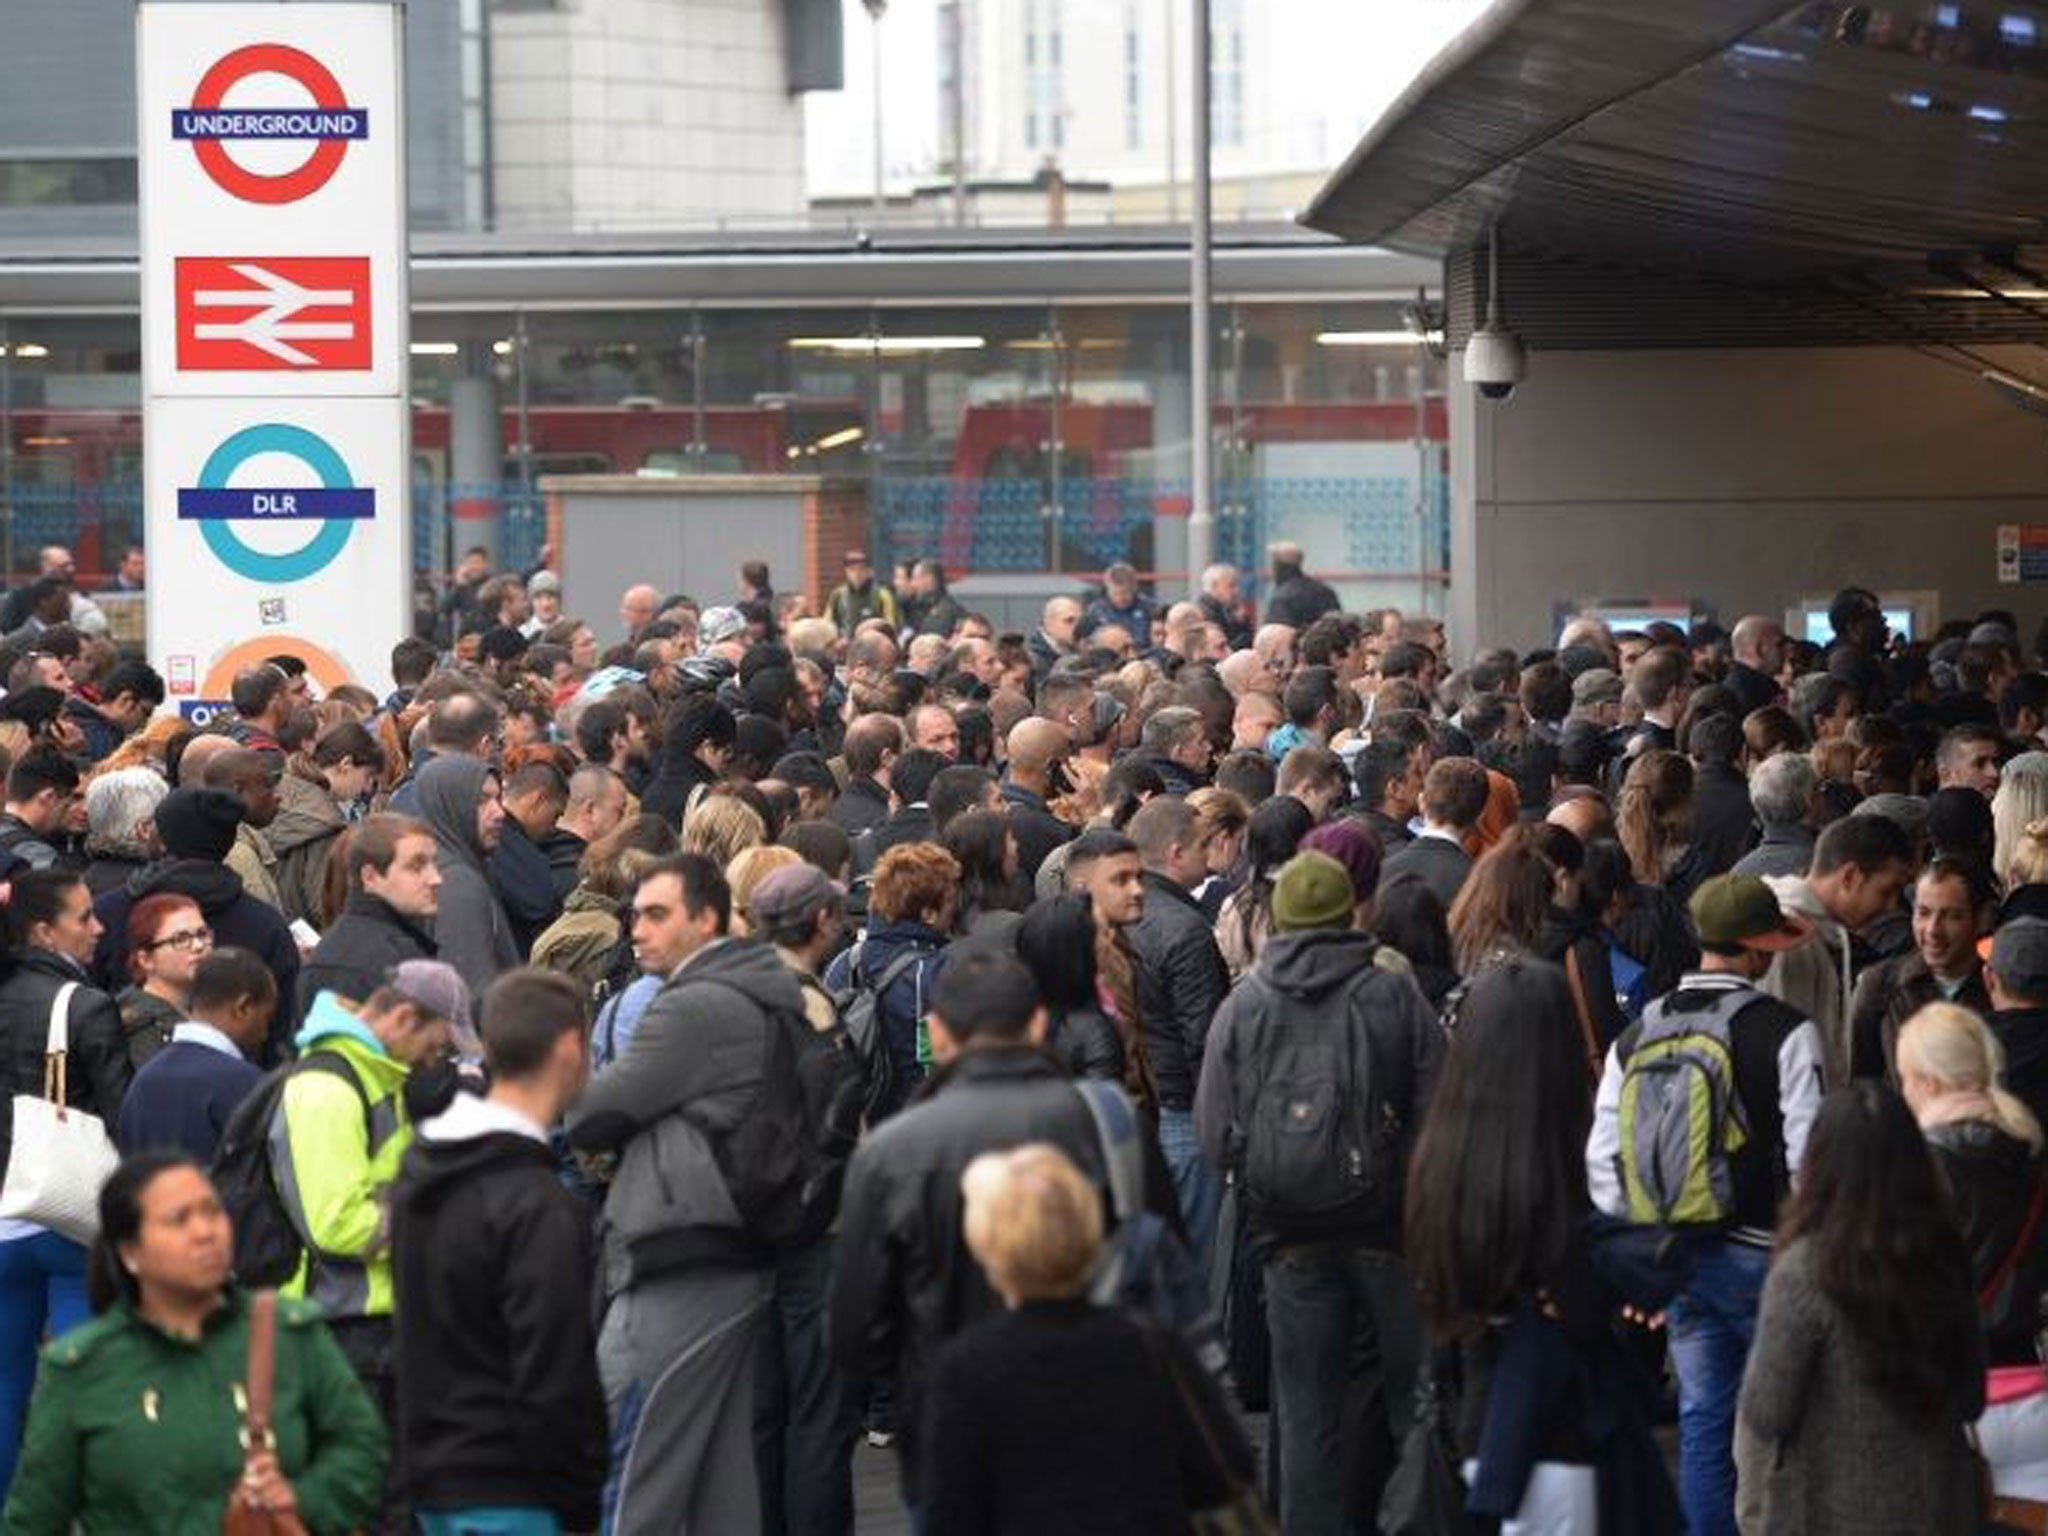 London Tube strike latest: Delays across Underground network following yesterday's walkout | The Independent